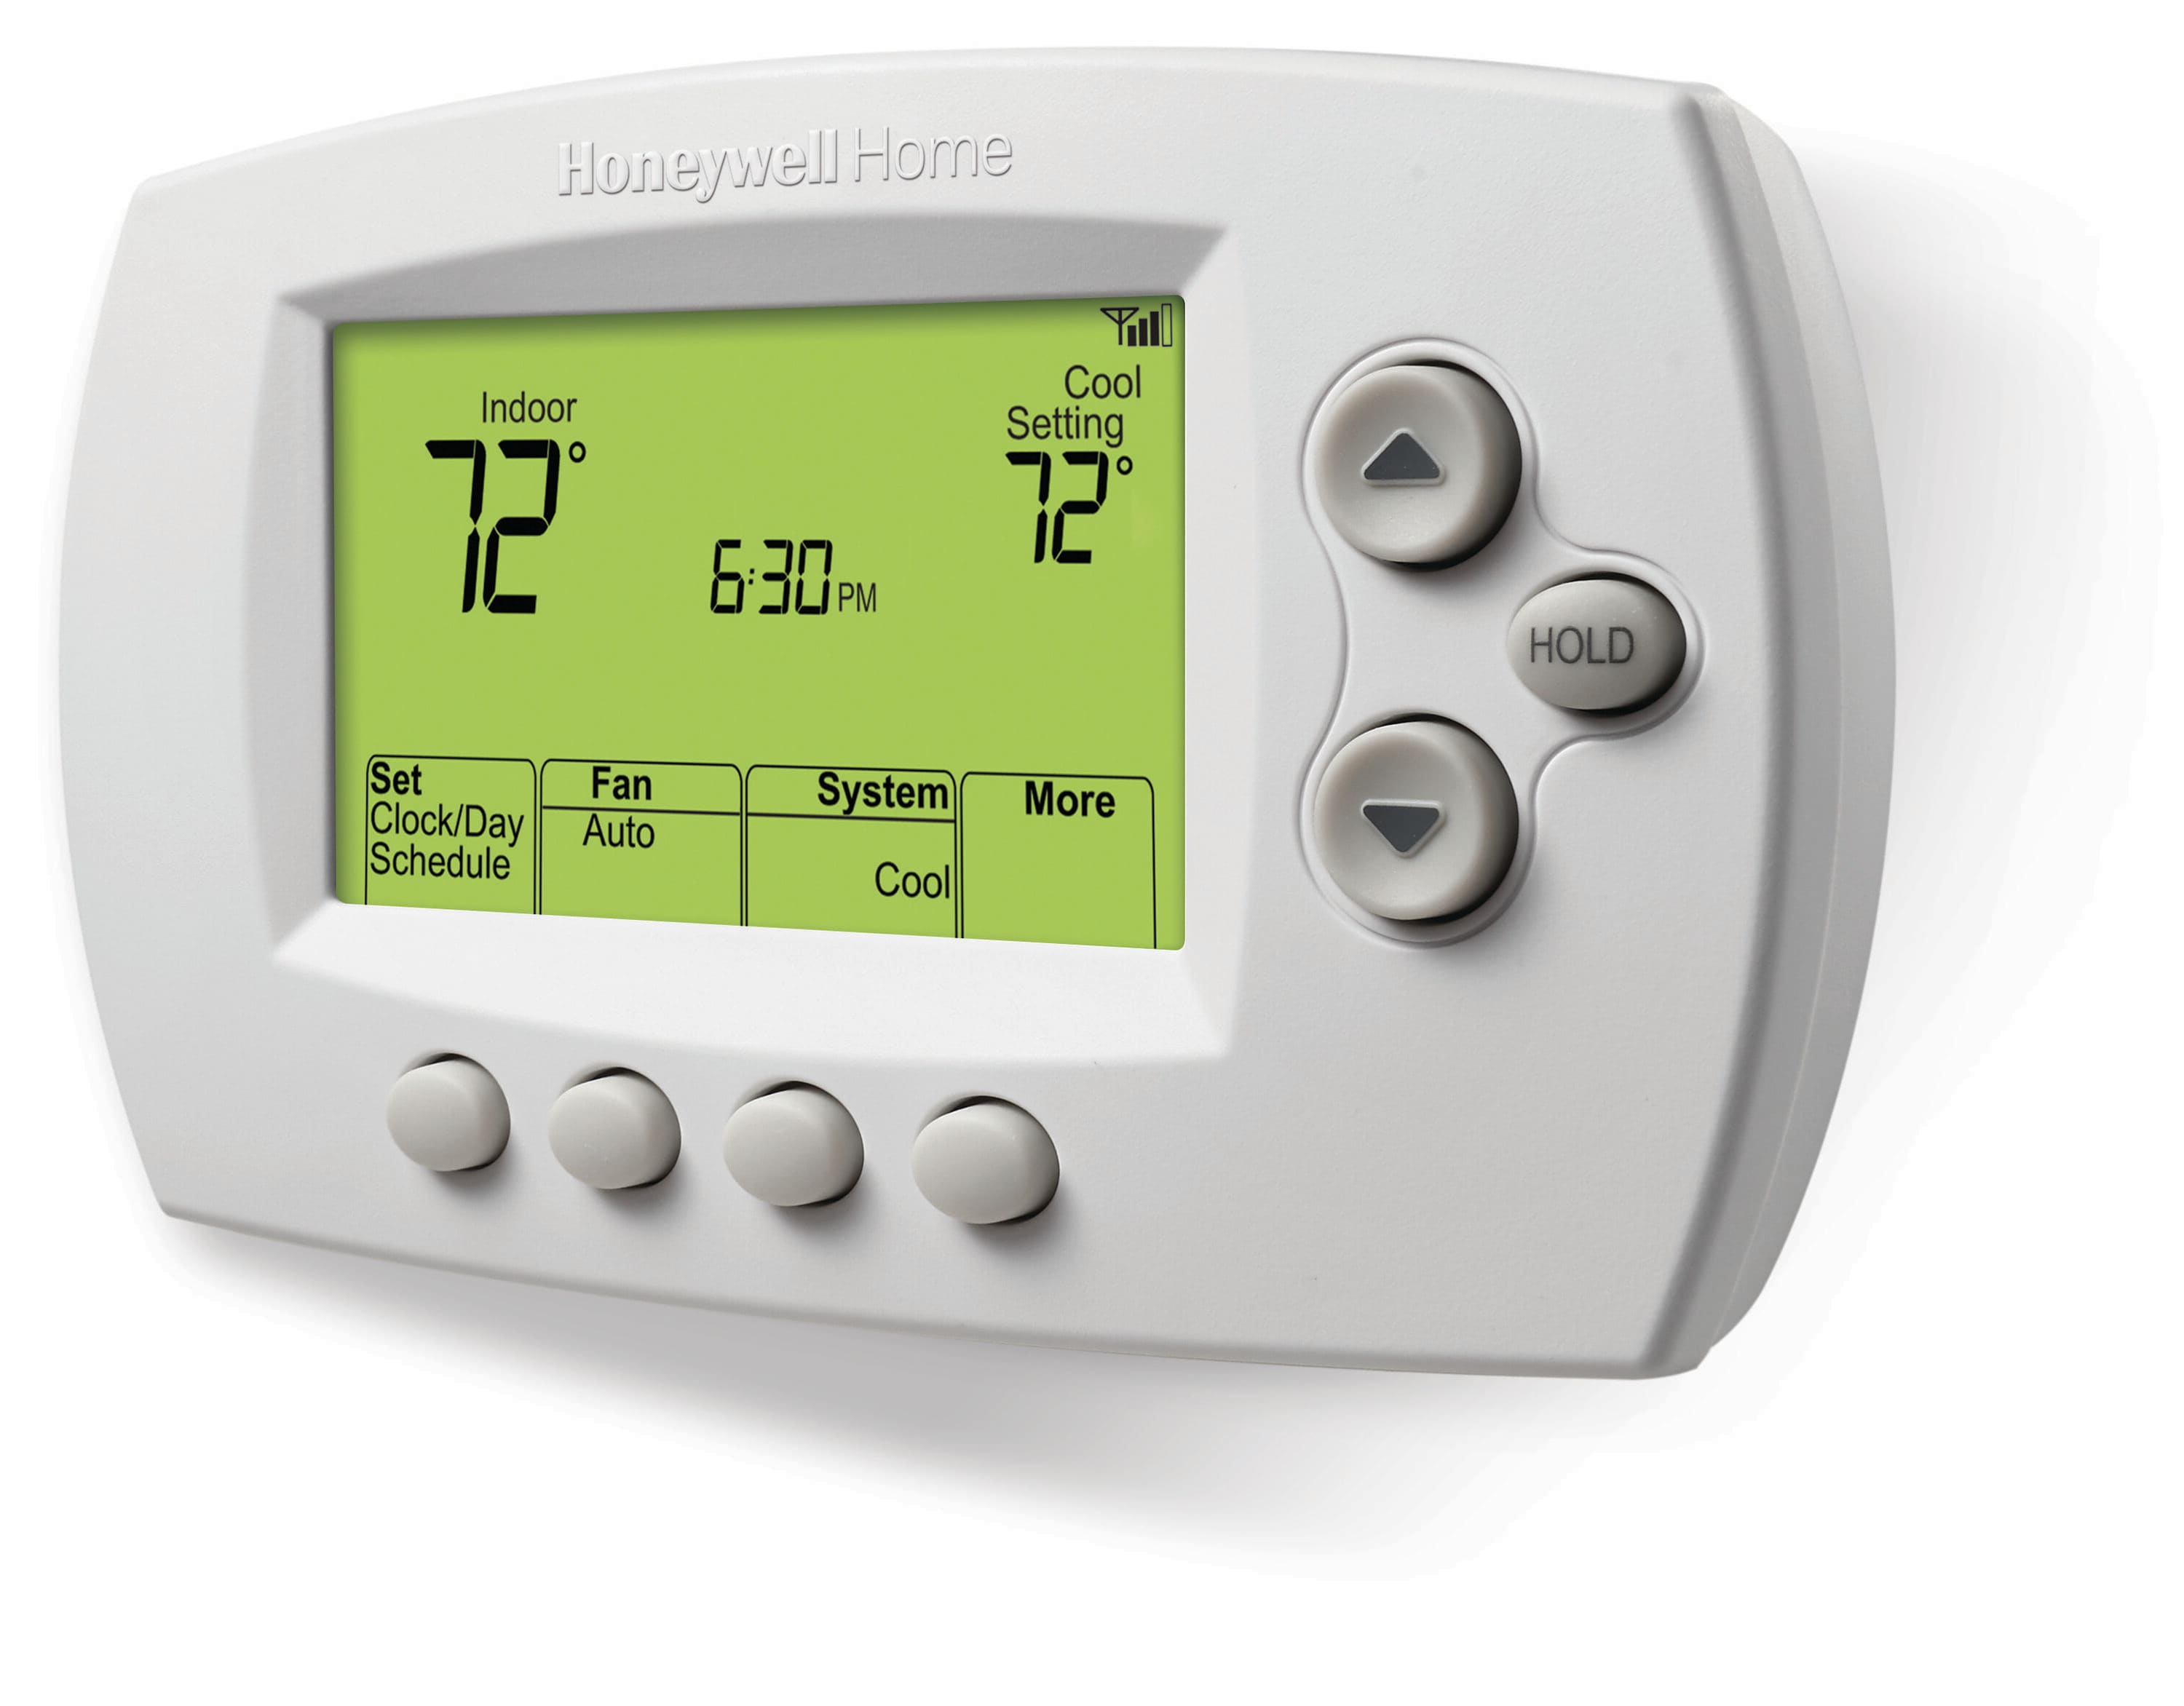 Honeywell Home RTH6580WF 7-Day White Thermostat Wi-Fi Compatibility the Smart Thermostats department Lowes.com